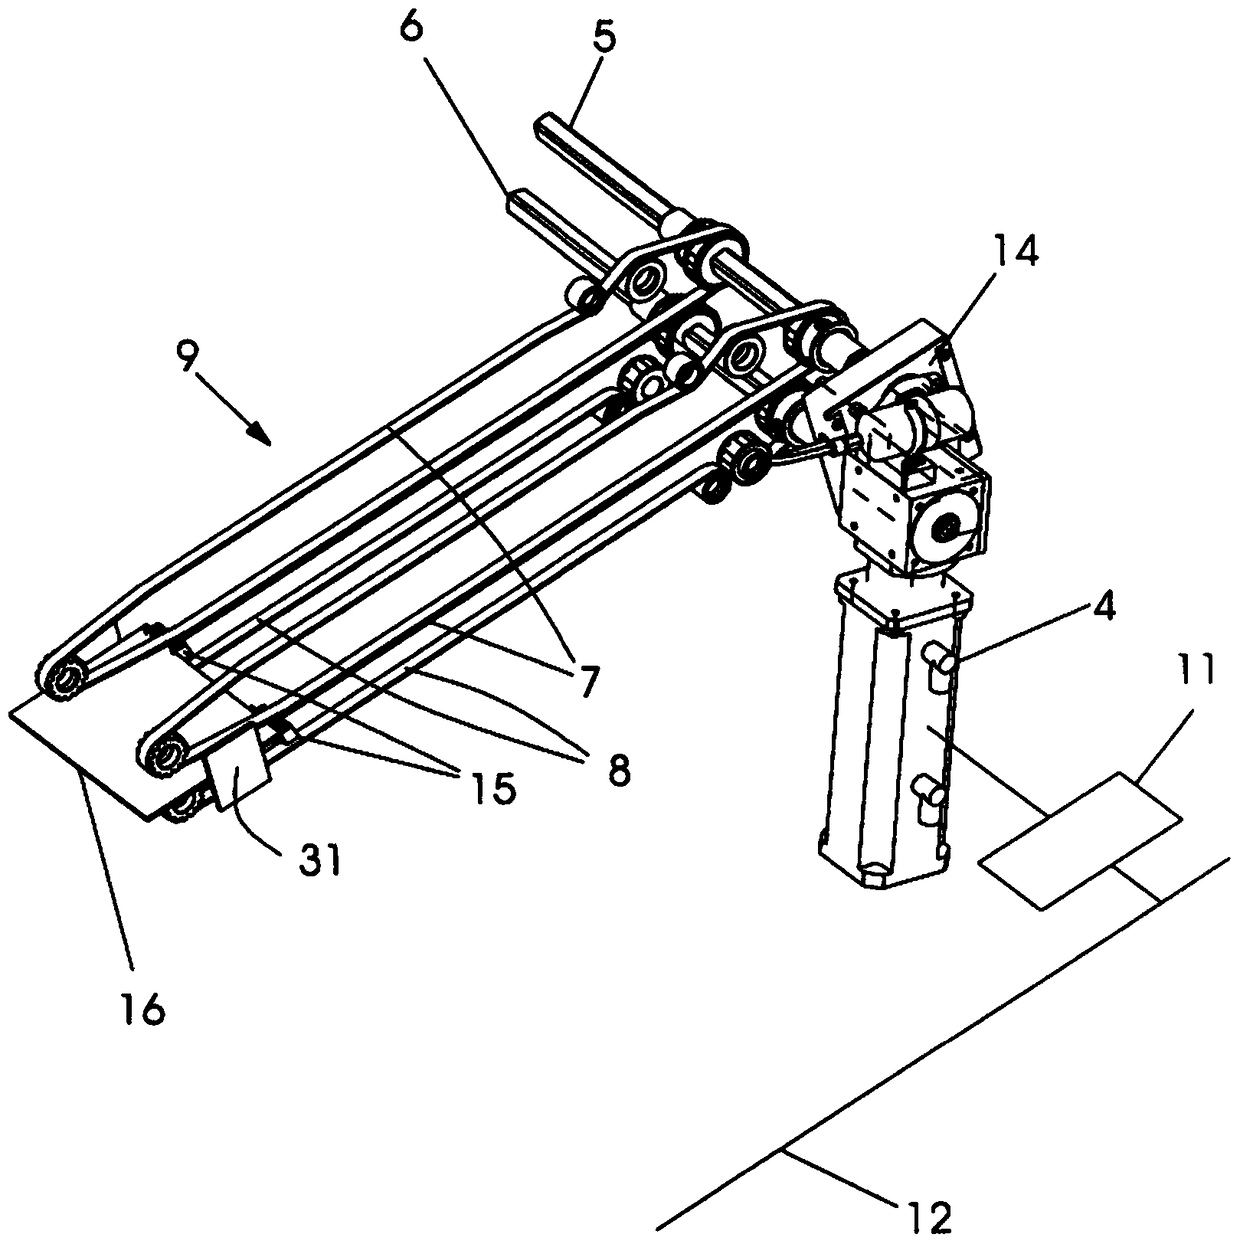 Device for cutting products on three sides